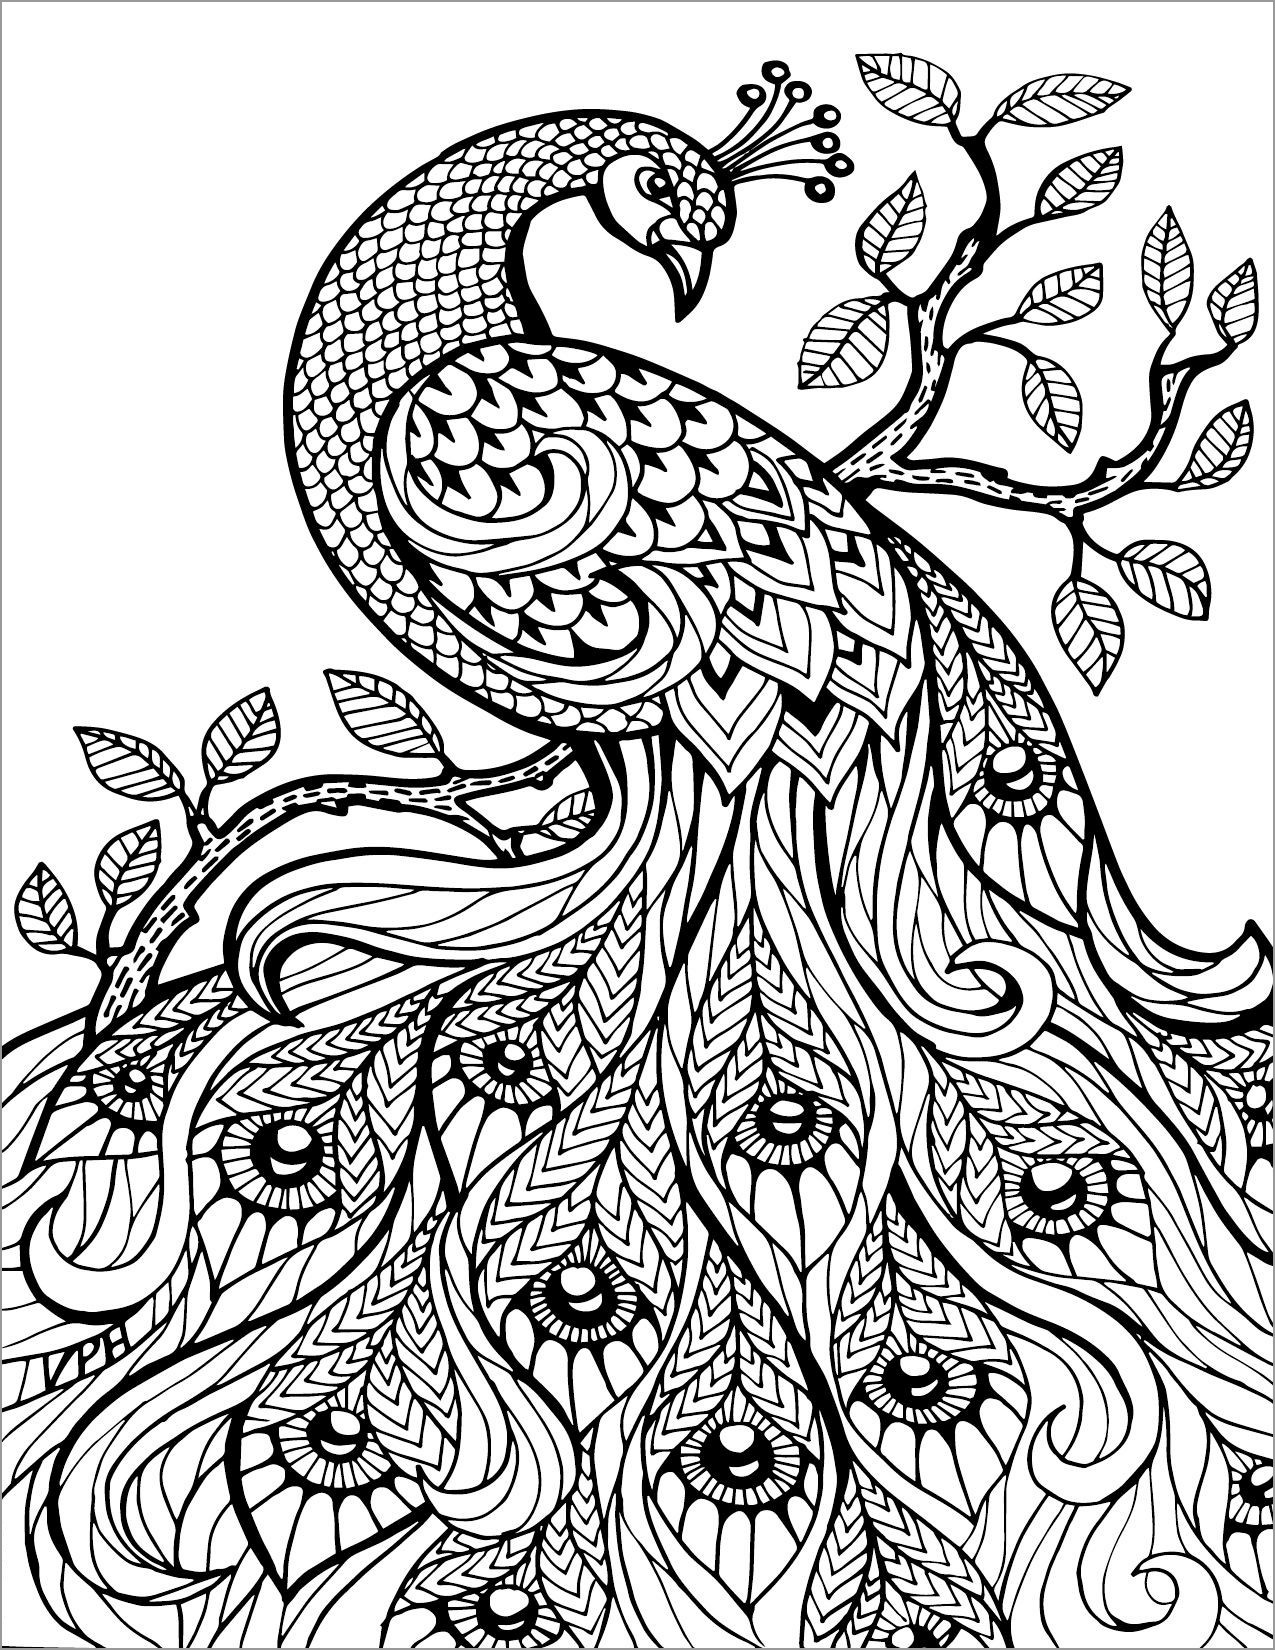 All kinds of Decoration Hare hard abstract art coloring pages deer ...